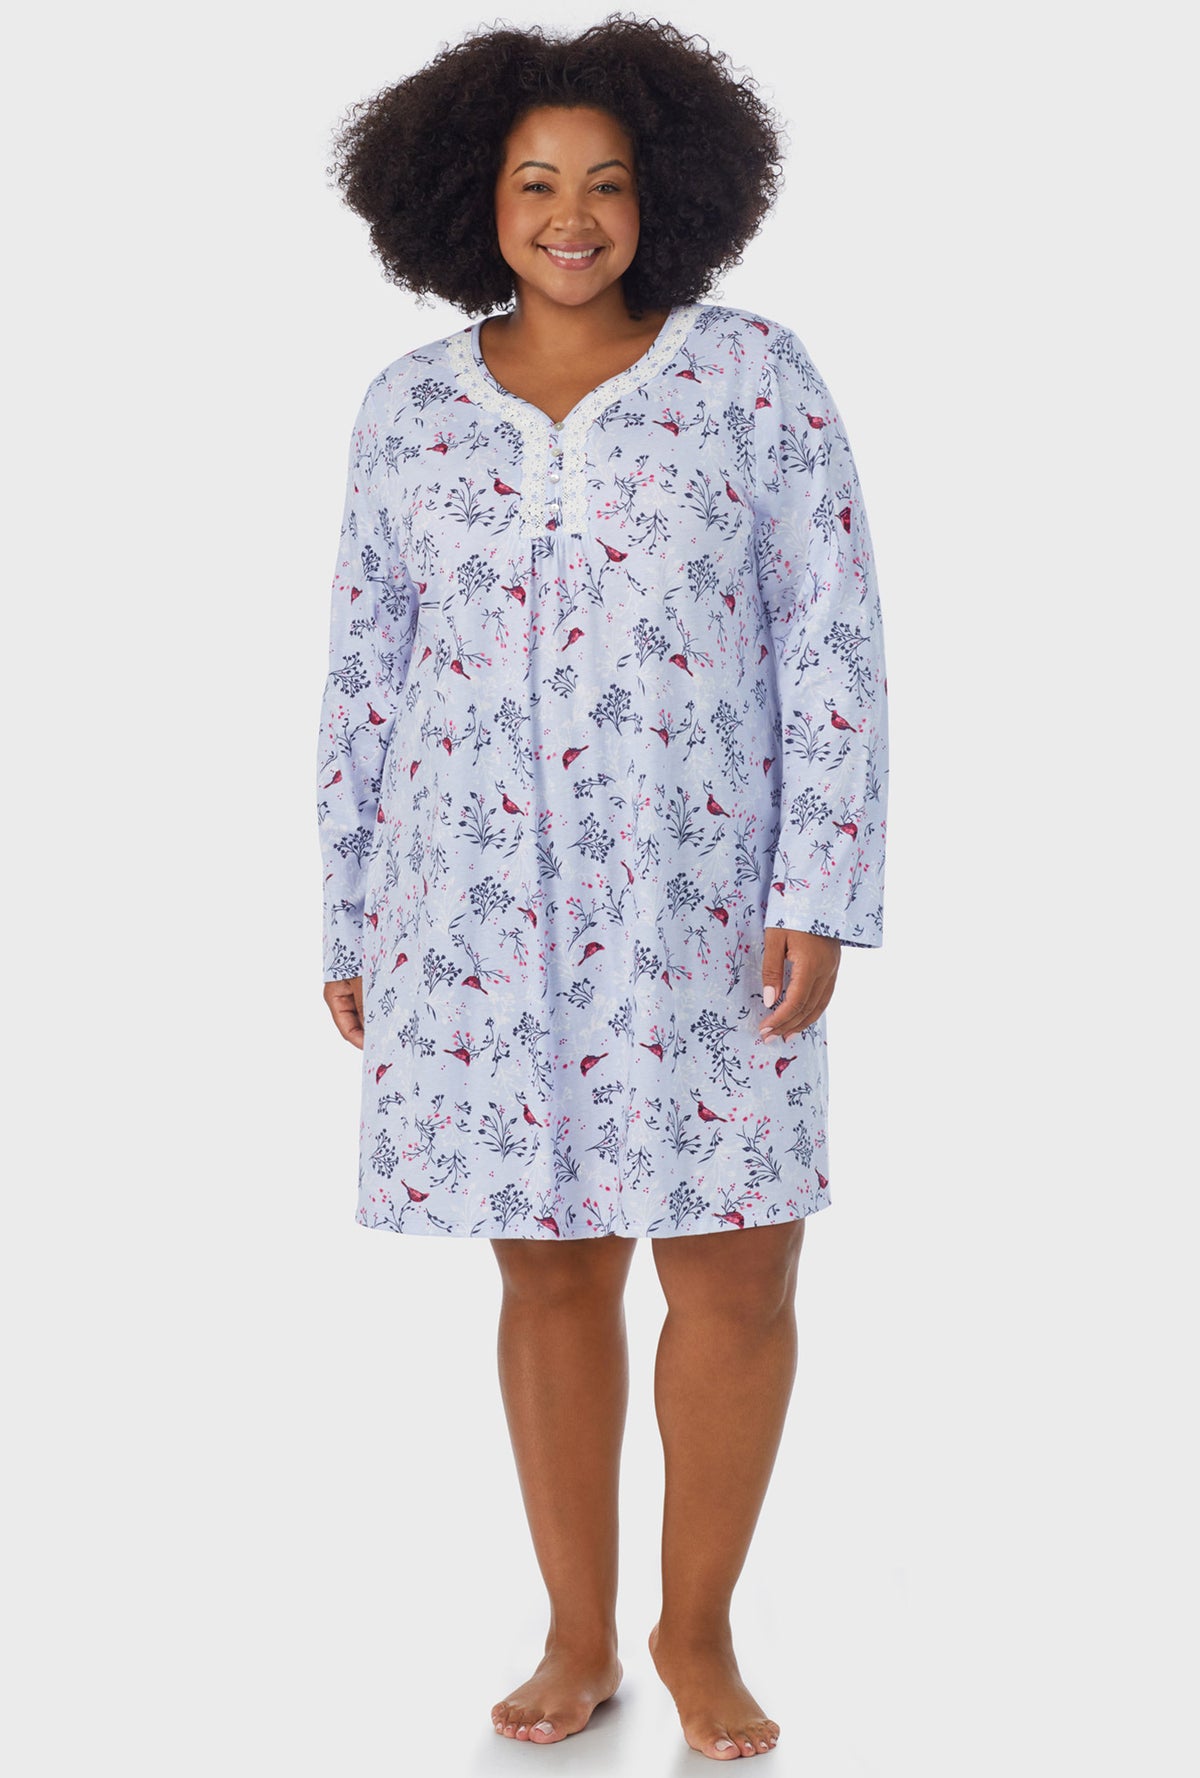 A lady wearing white Long Sleeve plus size Nightgown with Winter Blue print